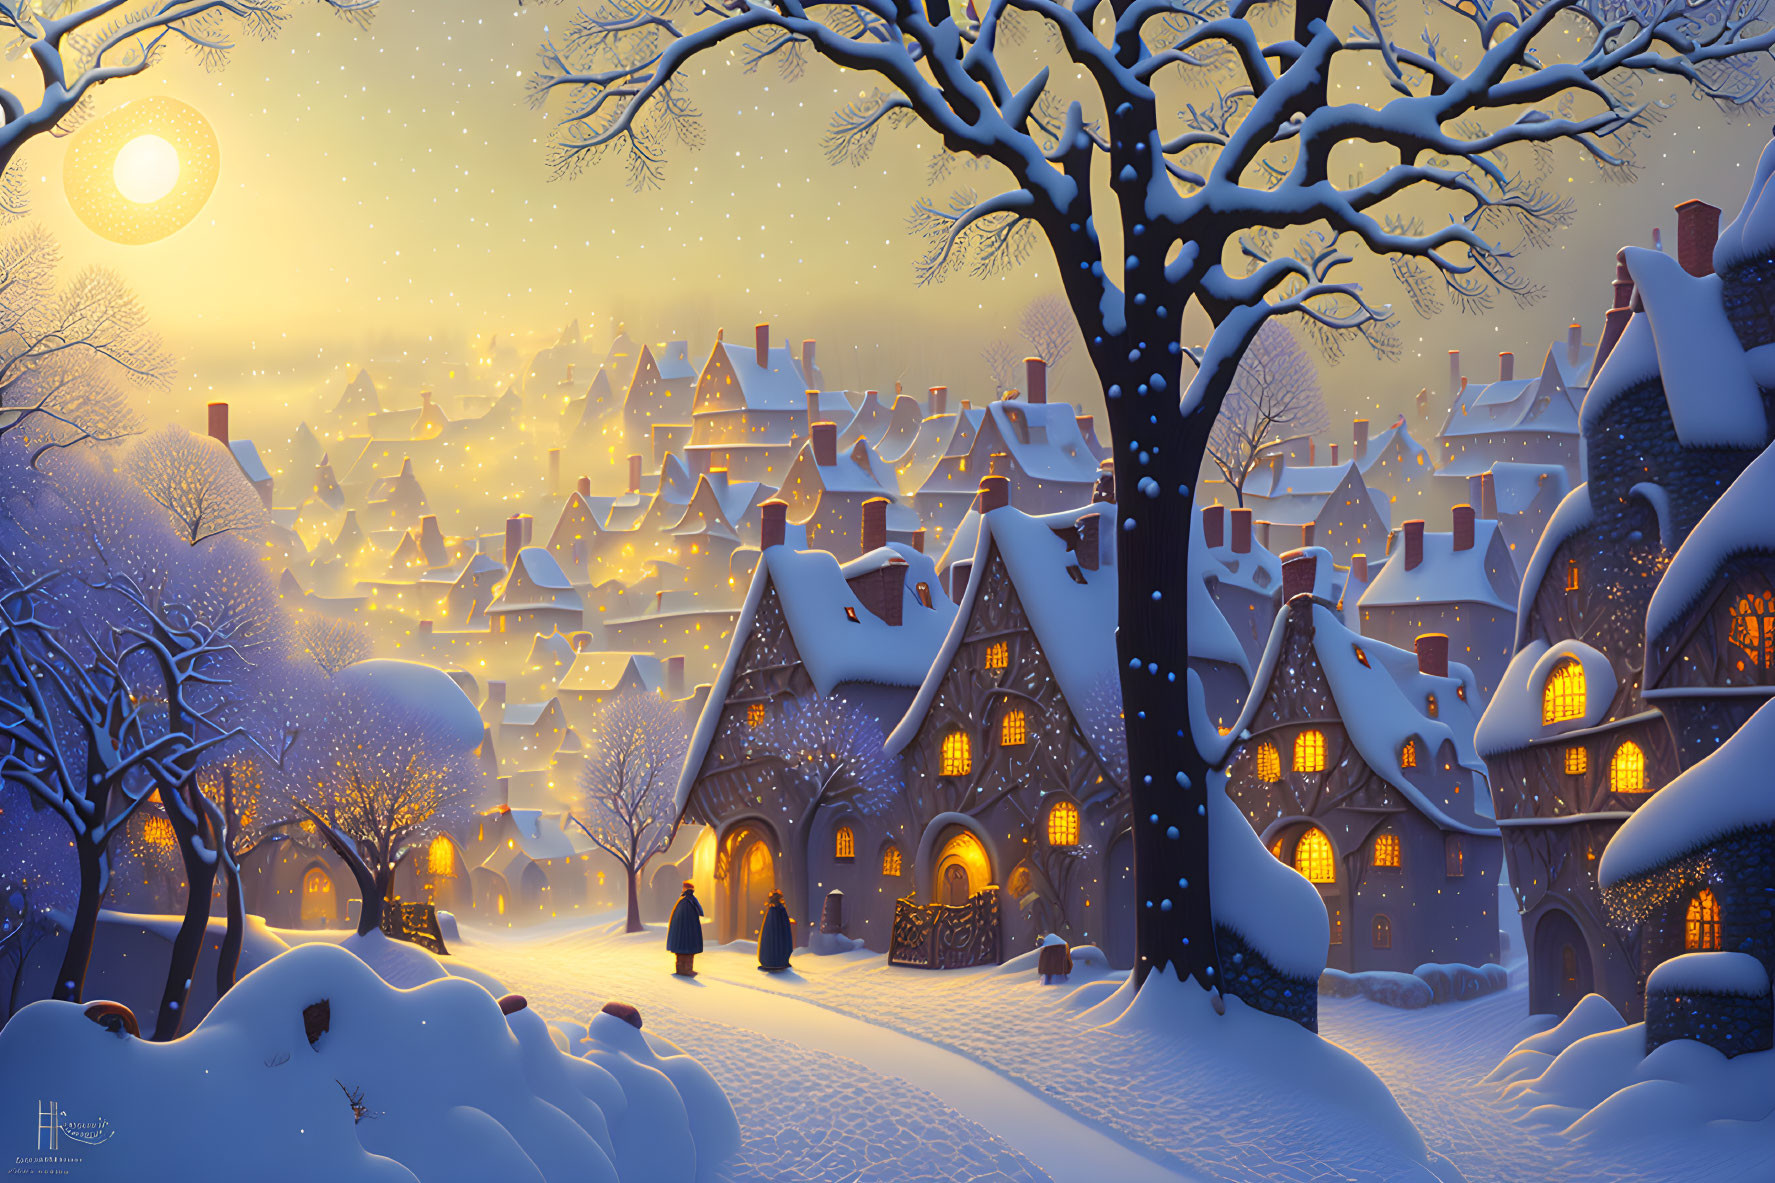 Snowy Evening Scene: Cozy Cottages, Moonlit Sky, Person Walking